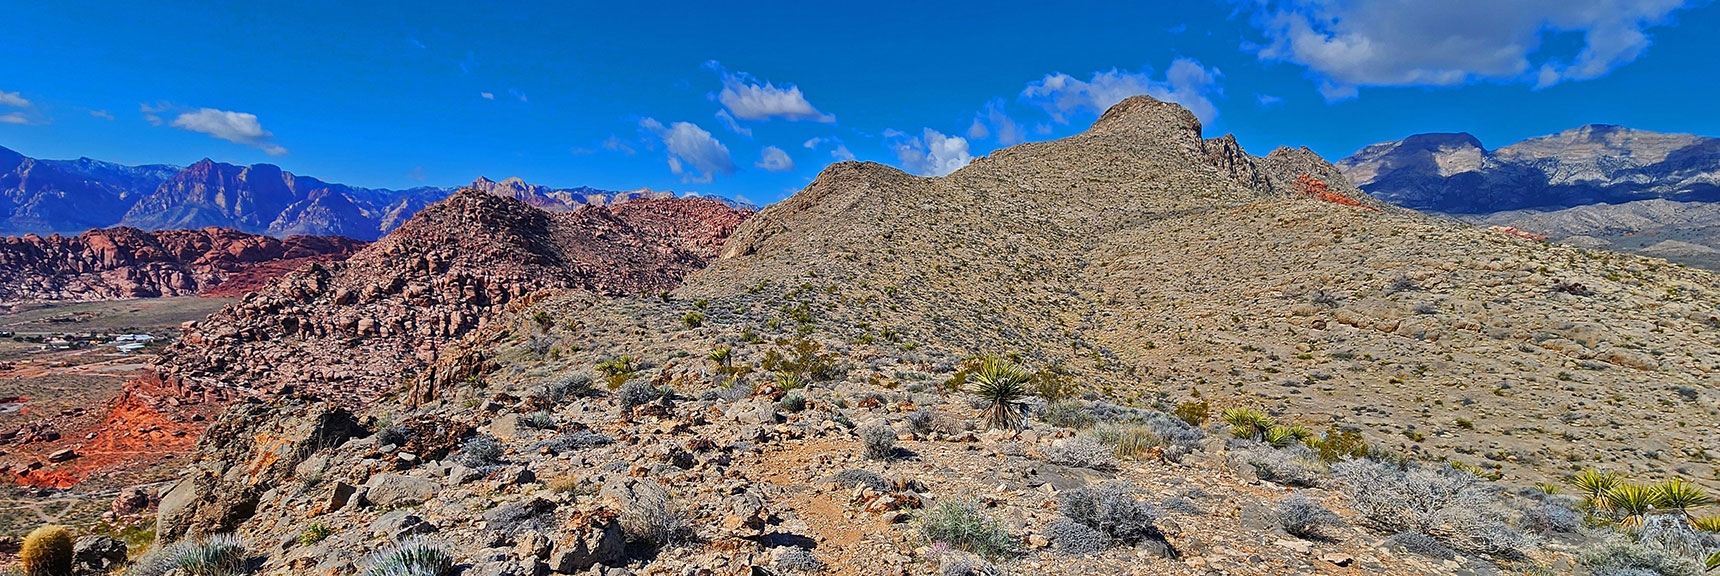 Calico Basin to the Left, Brownstone Basin to the Right, Southeast Summit Ahead! | Gray Cap Ridge Southeast Summit | La Madre Mountains Wilderness, Nevada